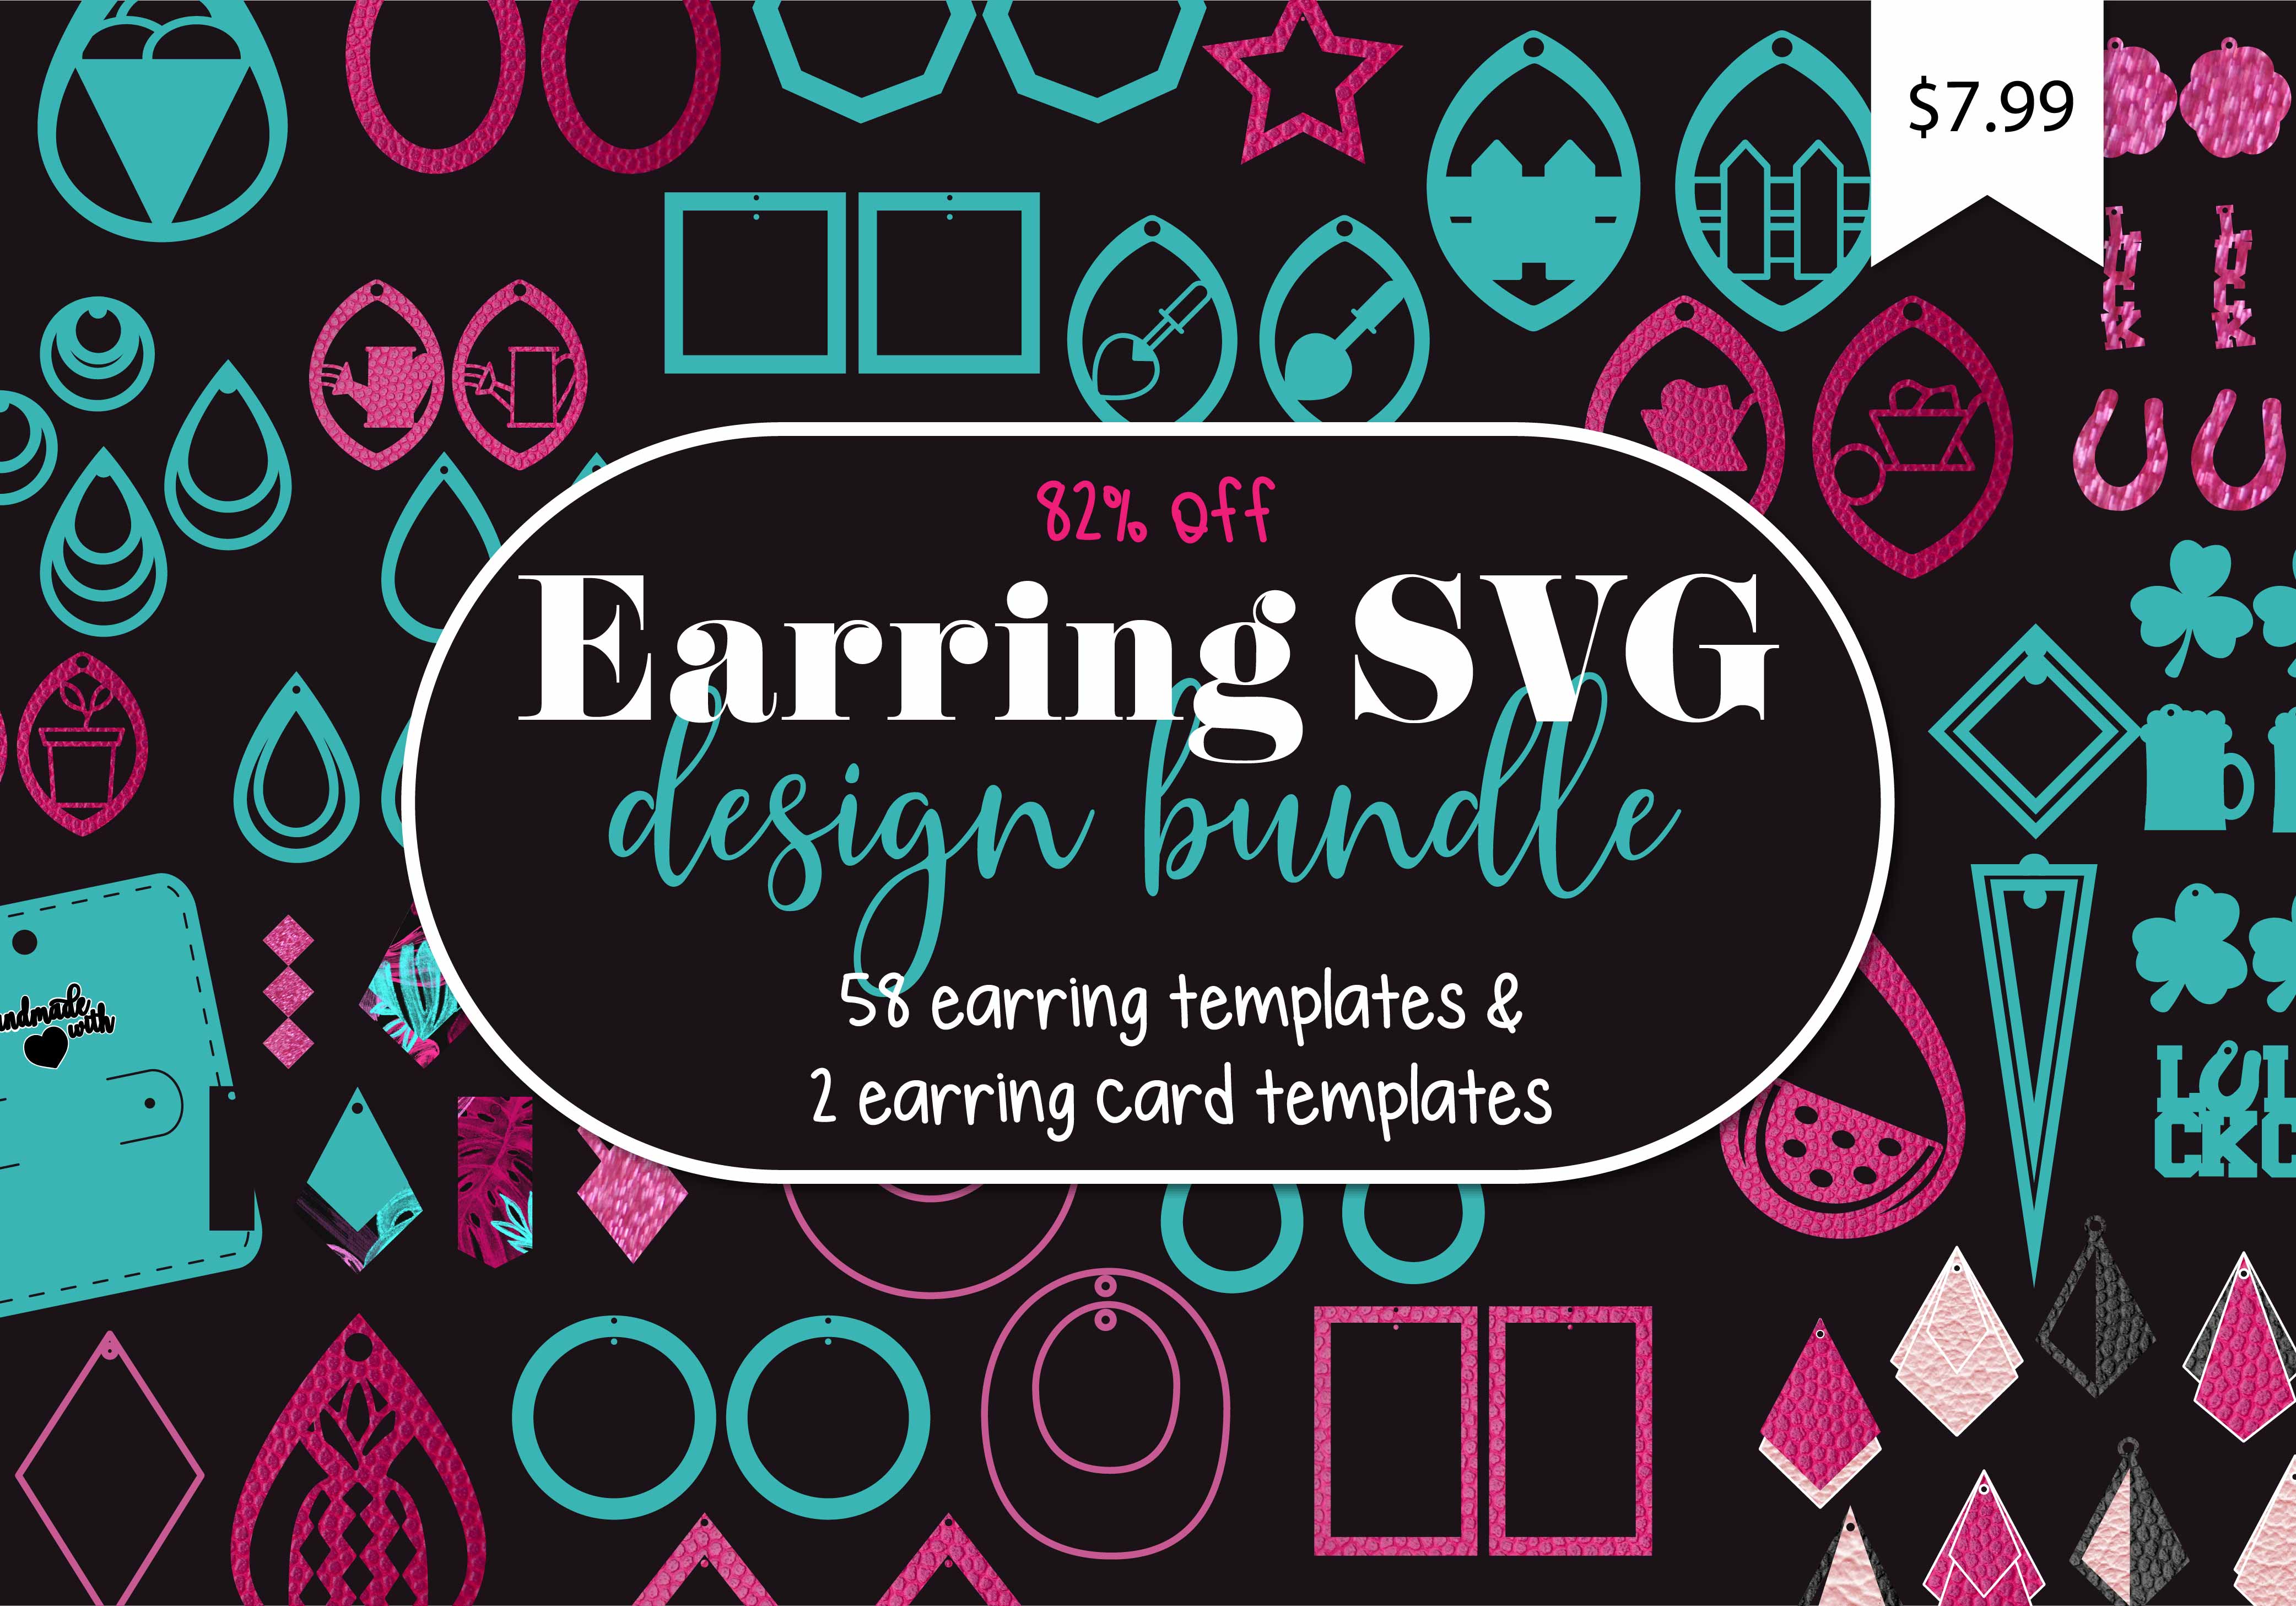 Earring SVG Bundle  Free Commercial Use License  So Fontsy